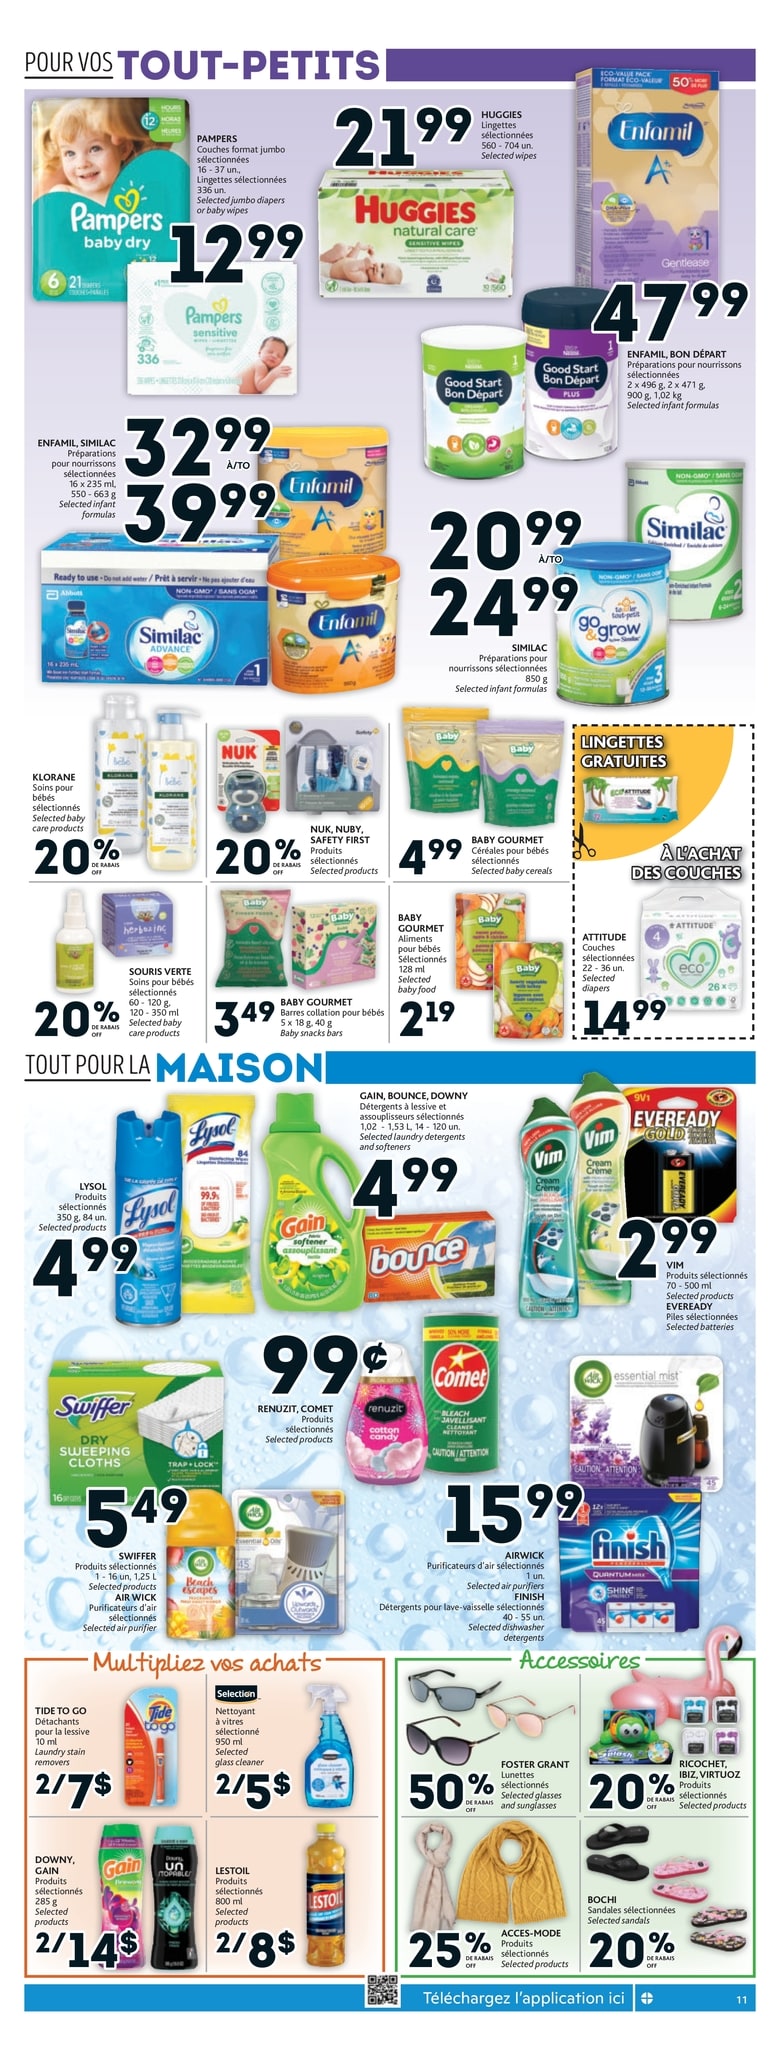 Brunet - Weekly Flyer Specials - Page 12